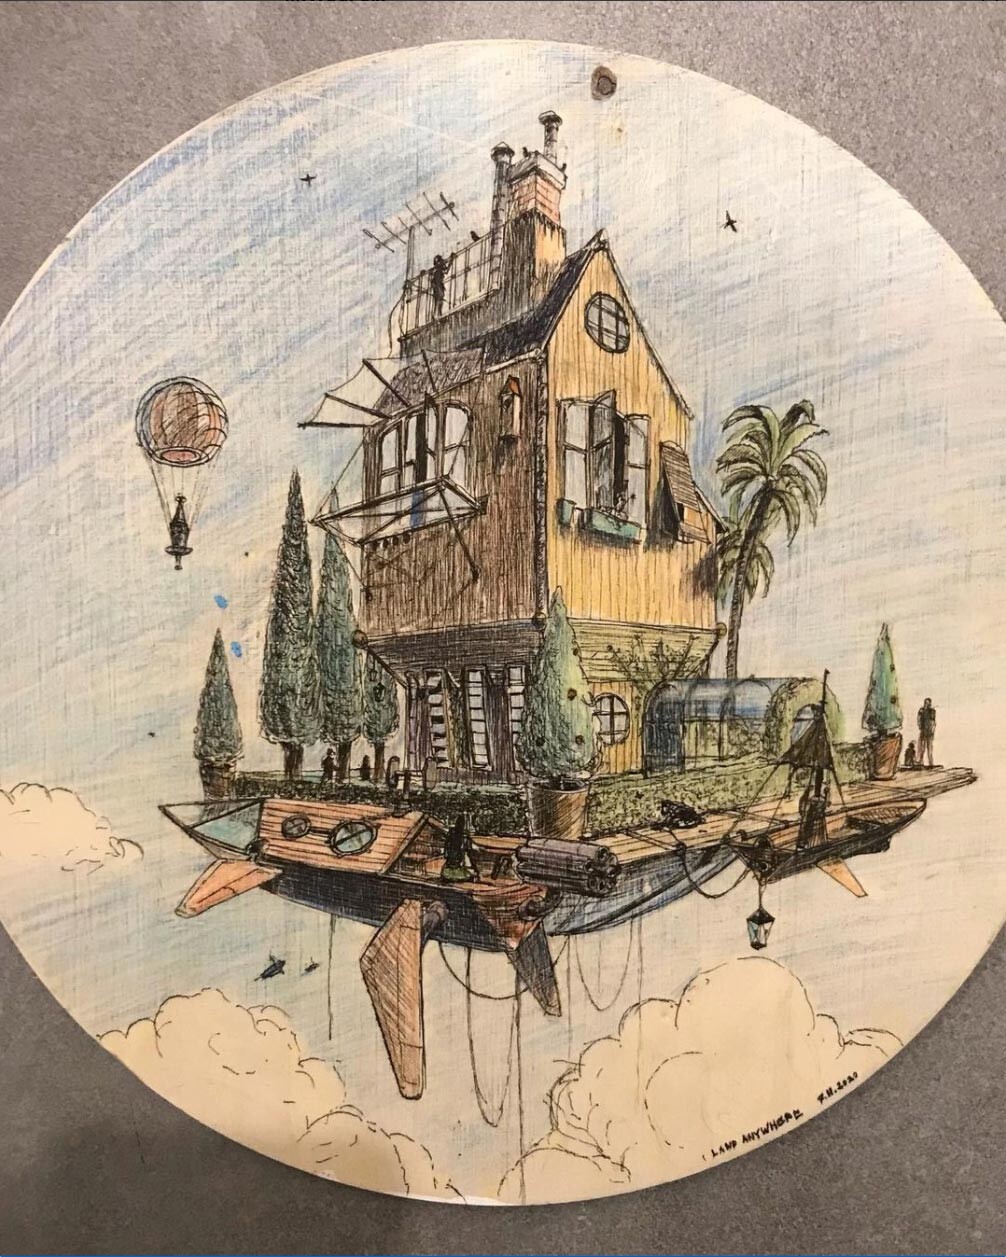 Hand drawn illustration on a wooden circle made for my parent’s’ renovated home